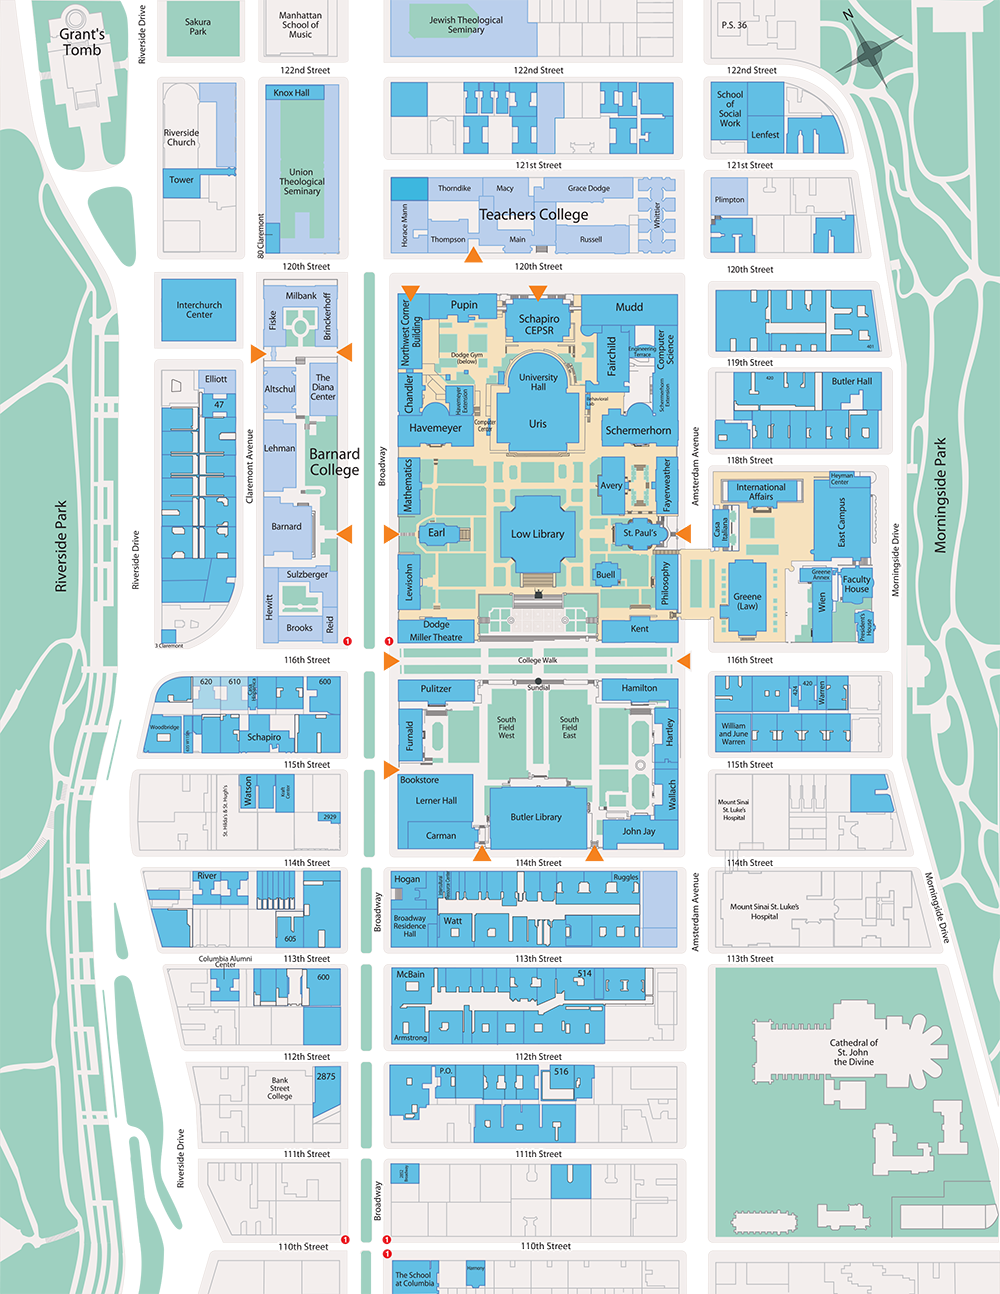 Morningside Campus Map